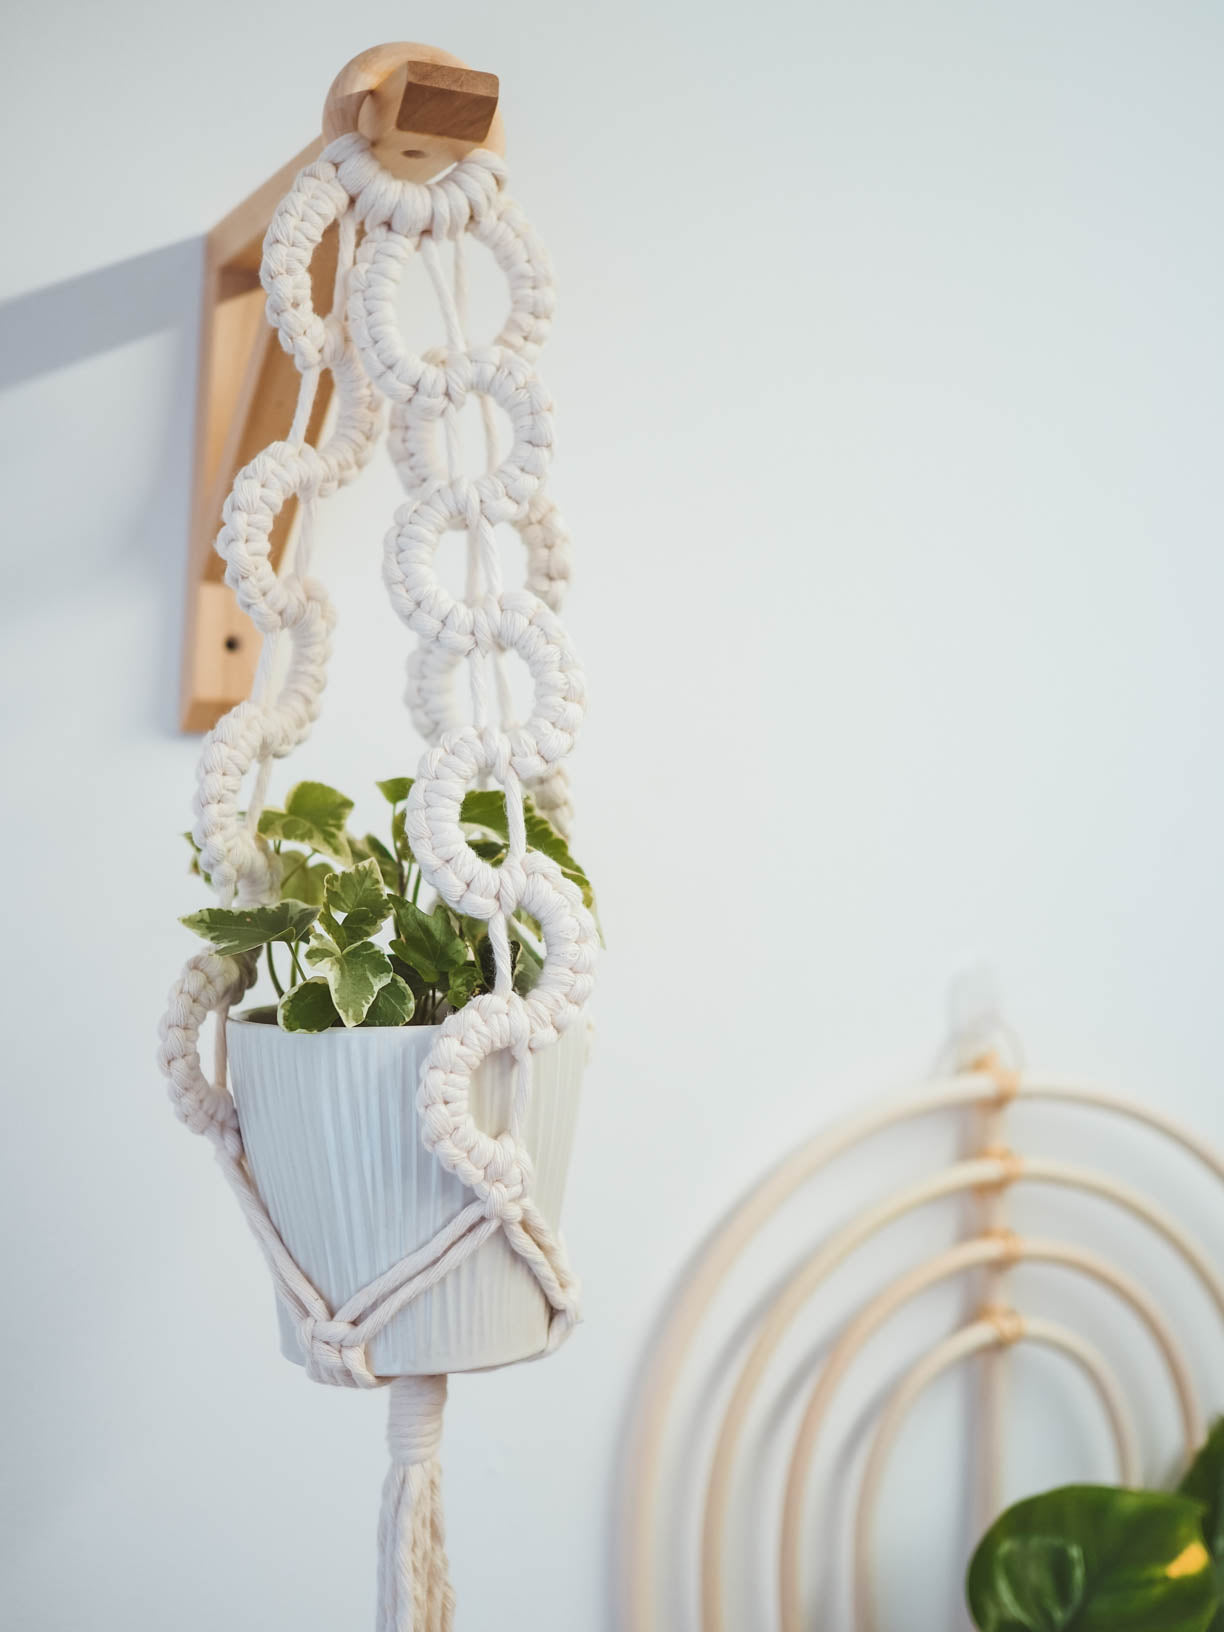 A pale blue plant pot and plant hung in a white wavy macrame plant hanger with a cane rainbow in the background